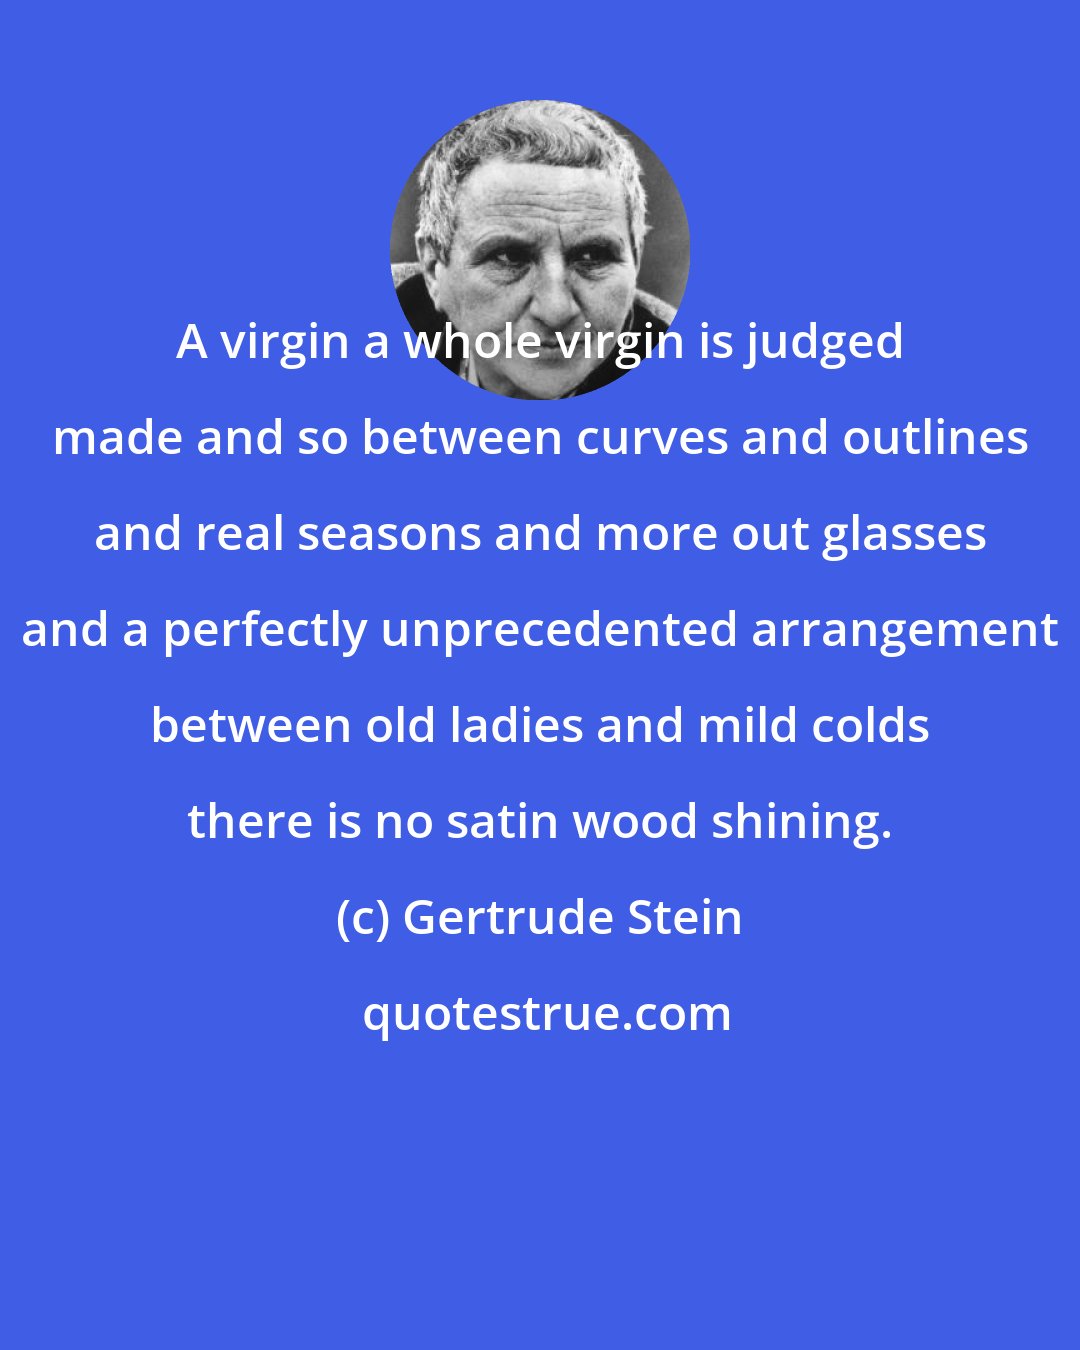 Gertrude Stein: A virgin a whole virgin is judged made and so between curves and outlines and real seasons and more out glasses and a perfectly unprecedented arrangement between old ladies and mild colds there is no satin wood shining.